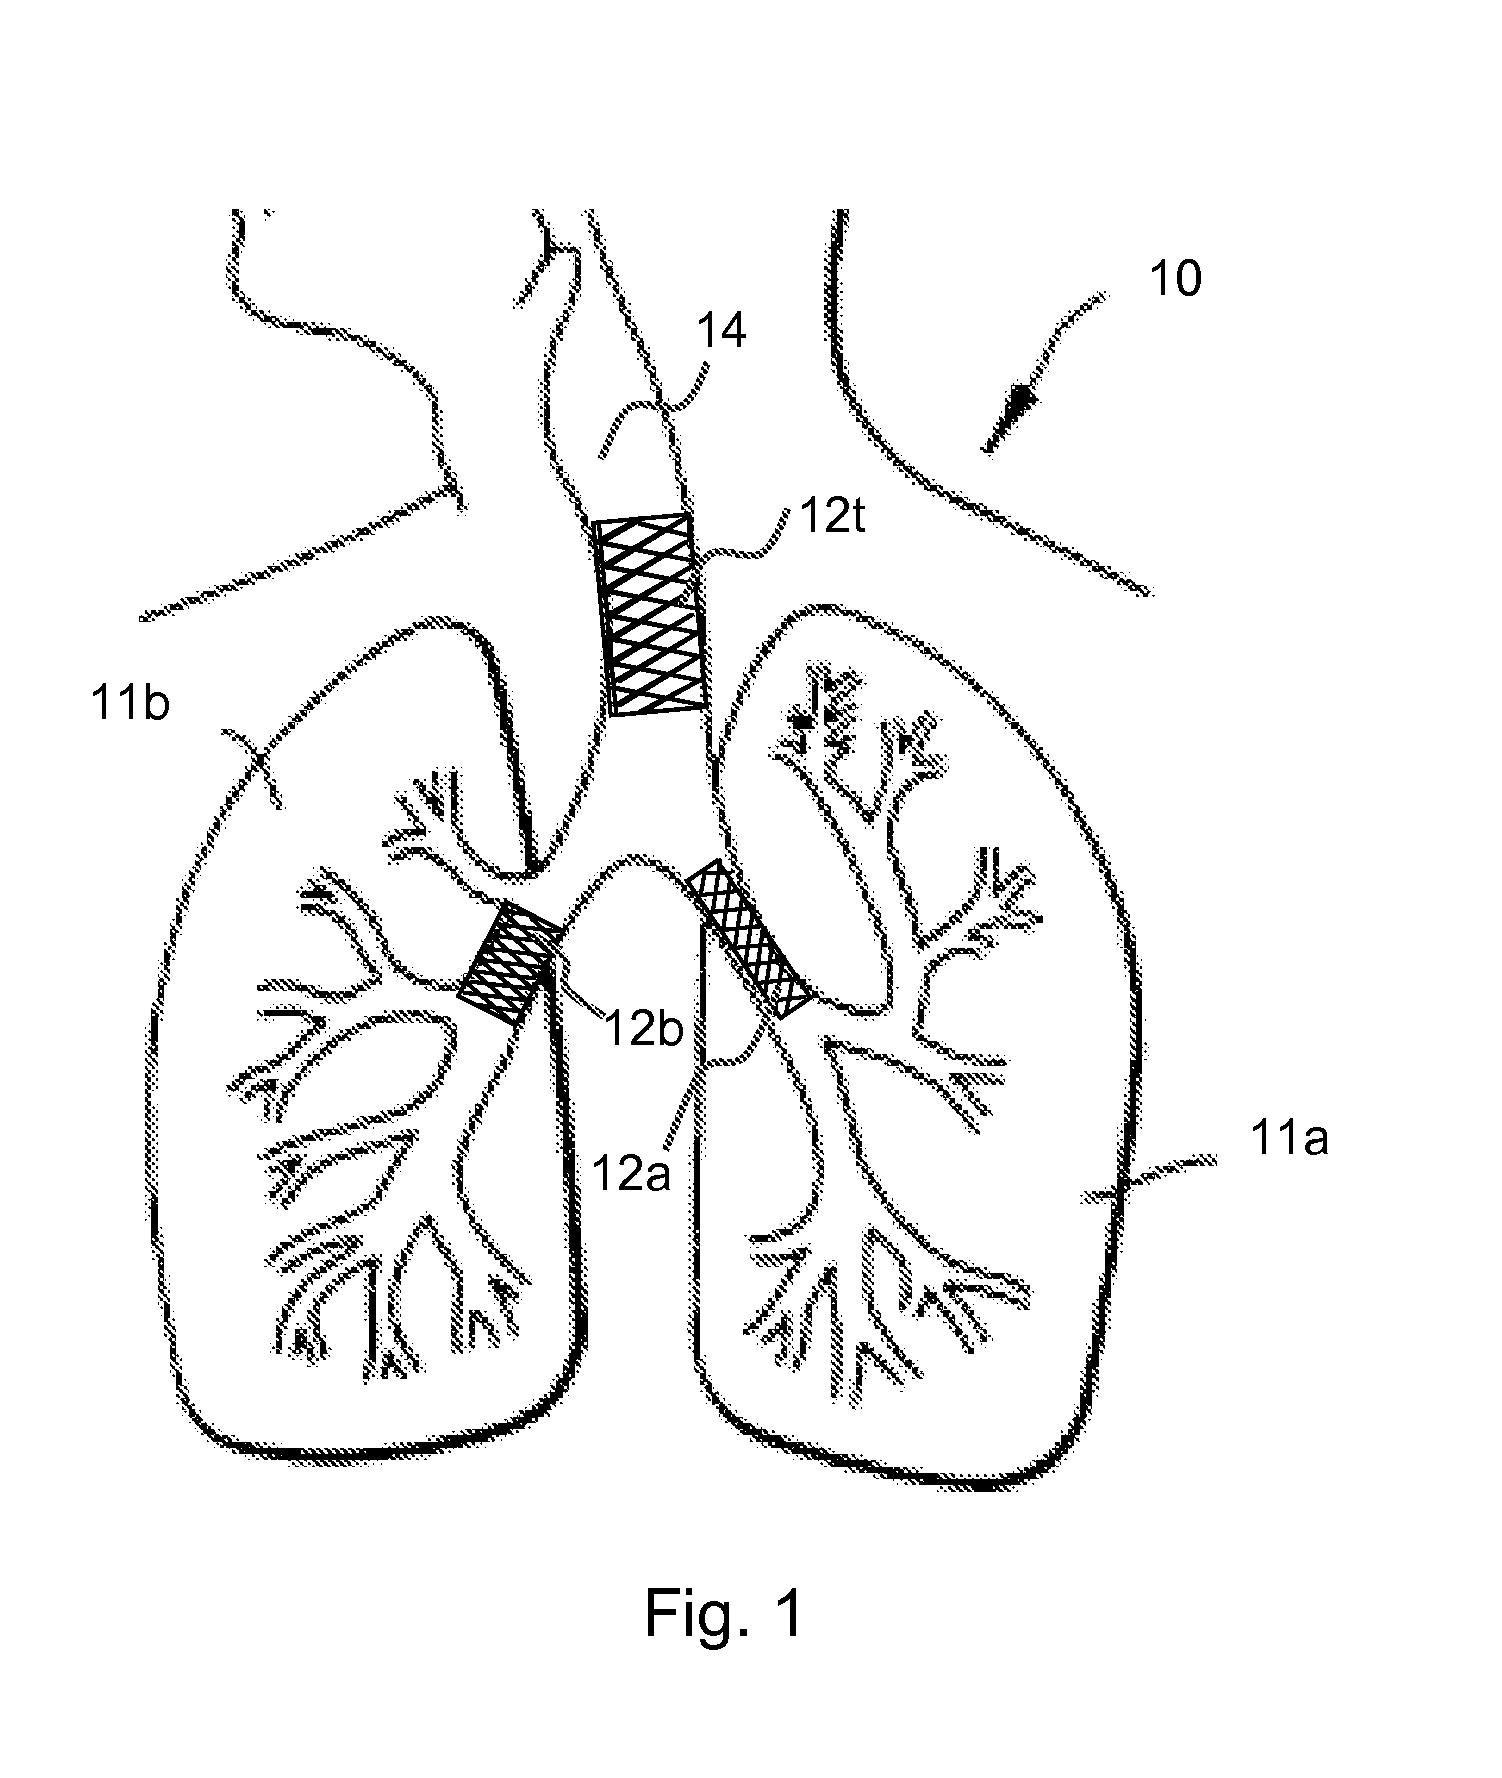 Therapeutic agent delivery for the treatment of asthma via implantable and insertable medical devices